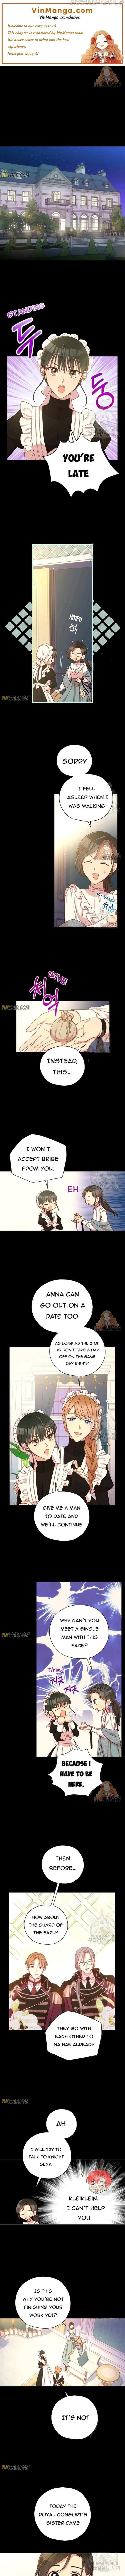 Surviving As A Maid  - page 1